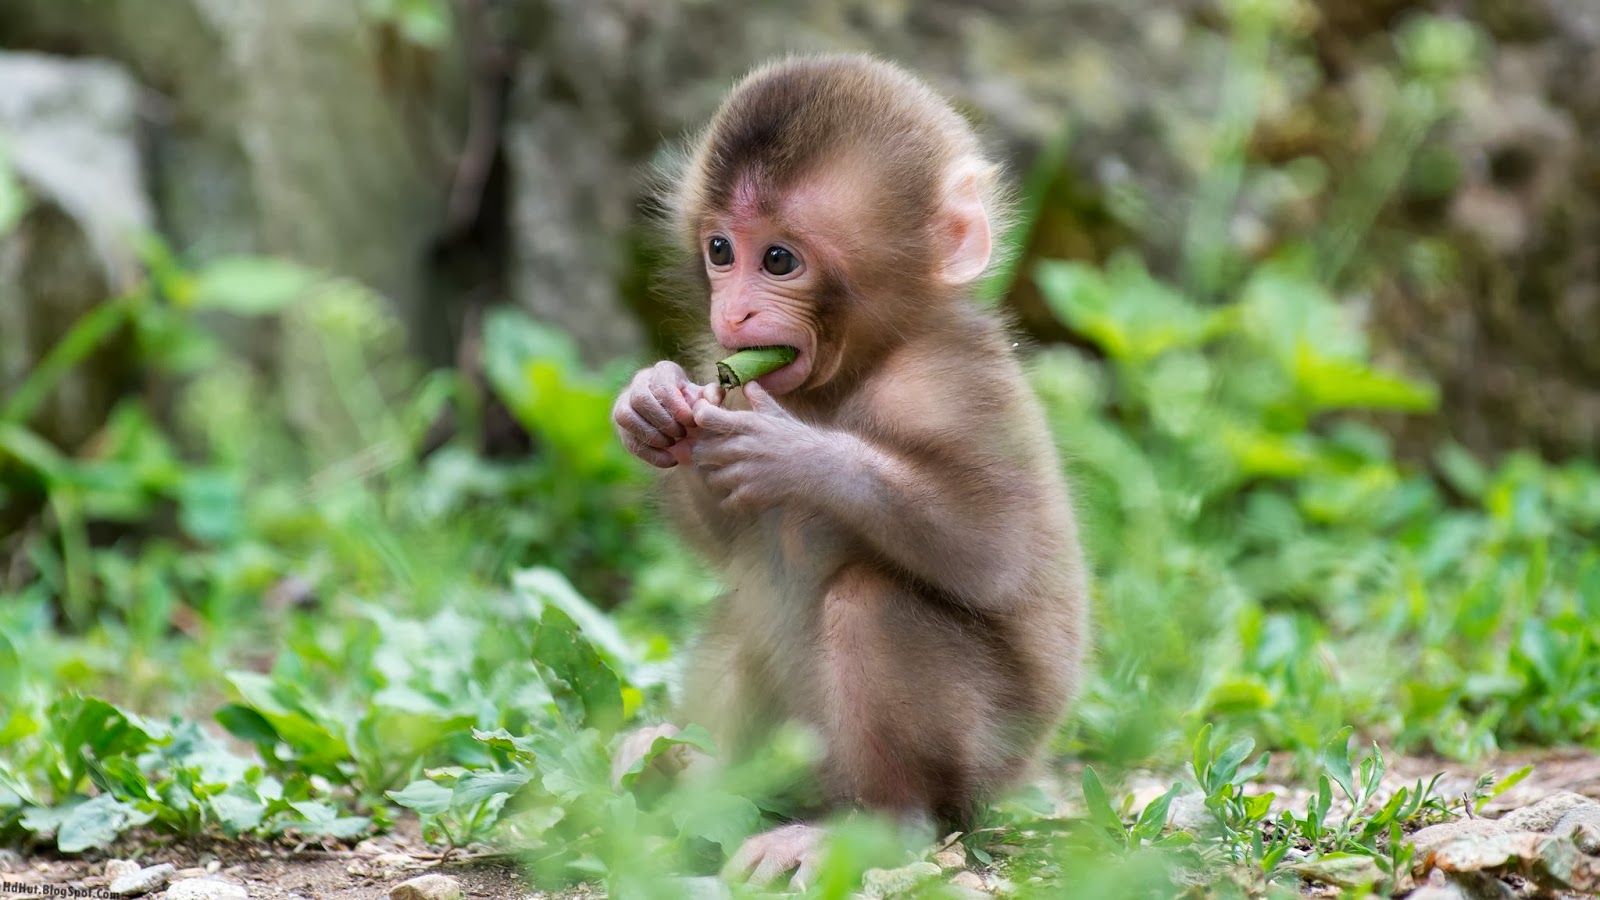 Most Cute And Beautiful Monkey Wallpaper In HD